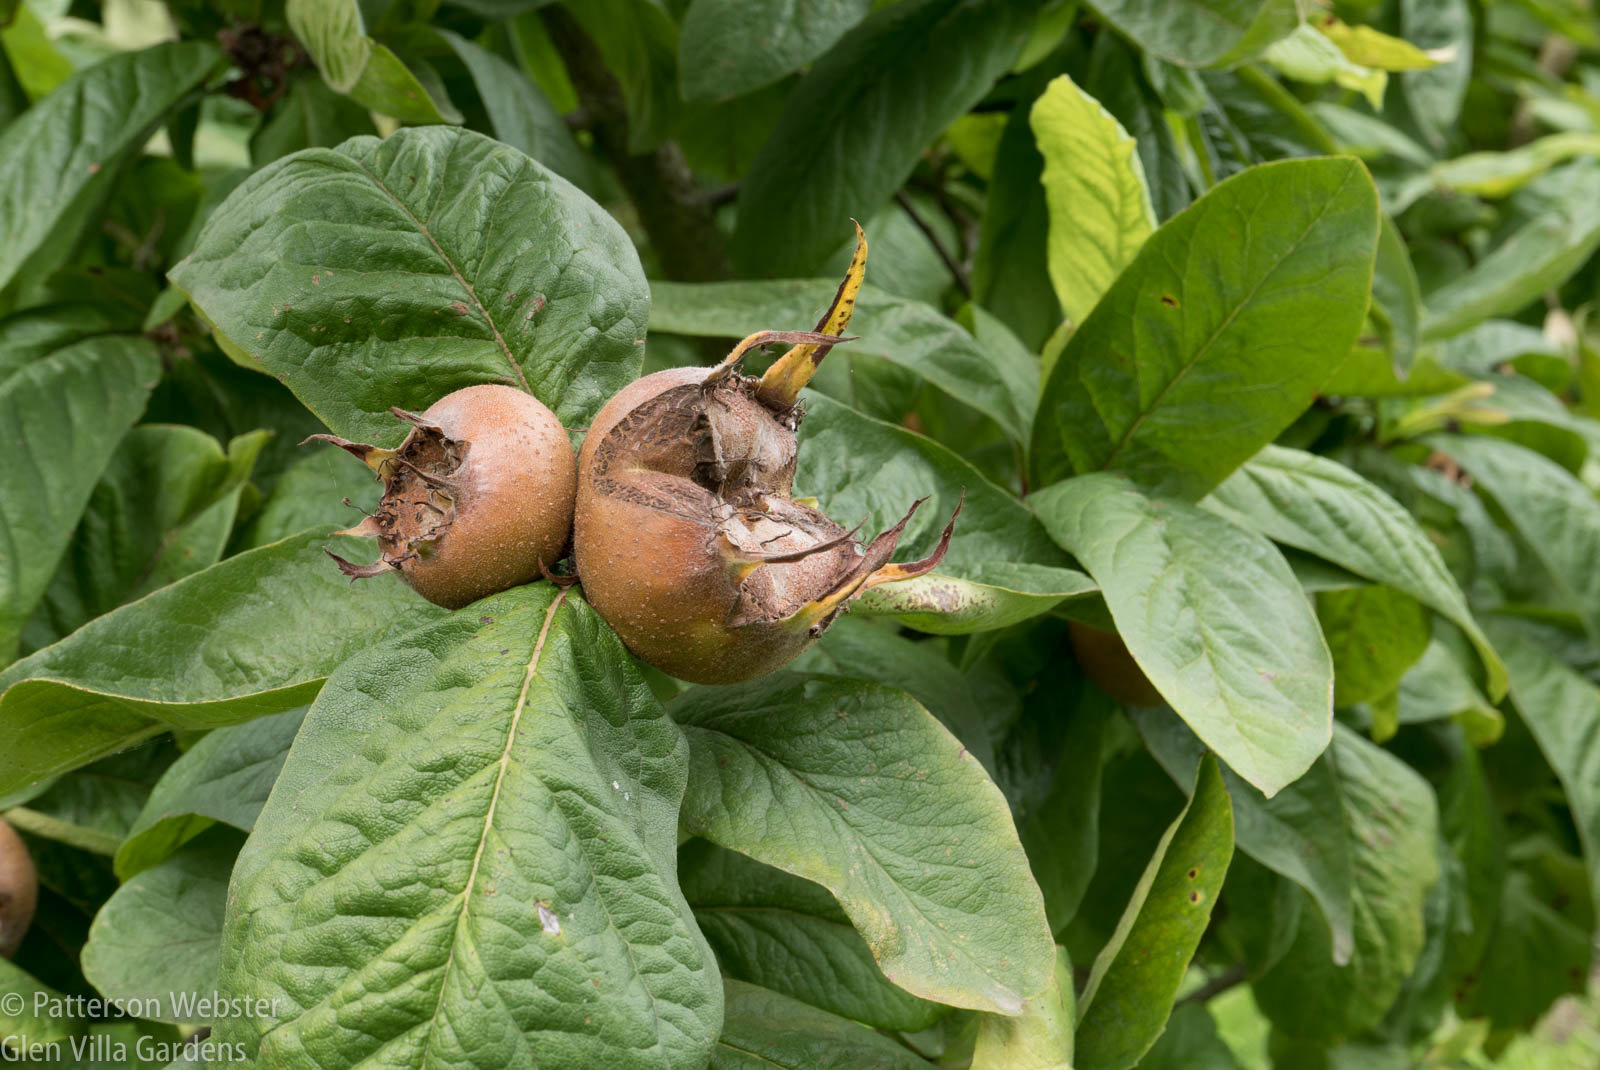 These medlars are 